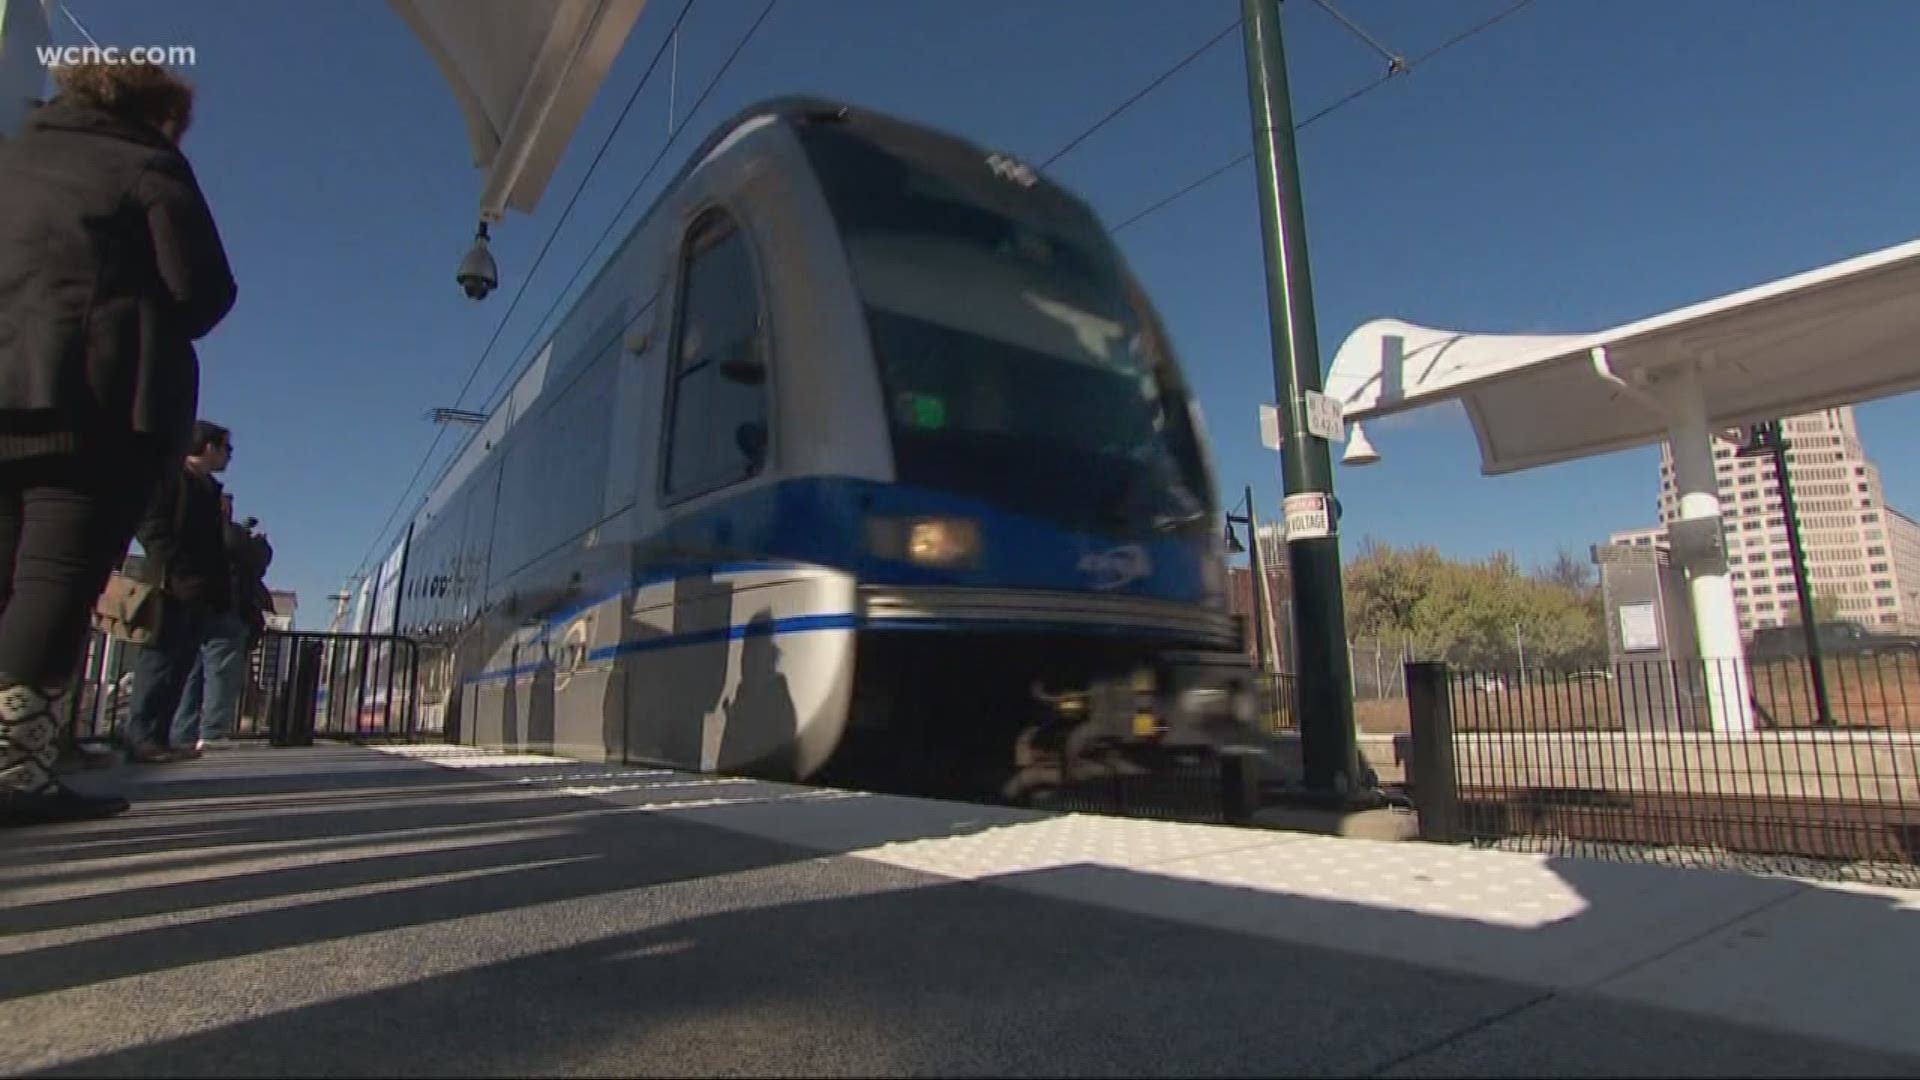 The much-anticipated Blue Line Extension opens Friday. The light rail is expected to get passengers from UNC Charlotte to uptown in just over 20 minutes.